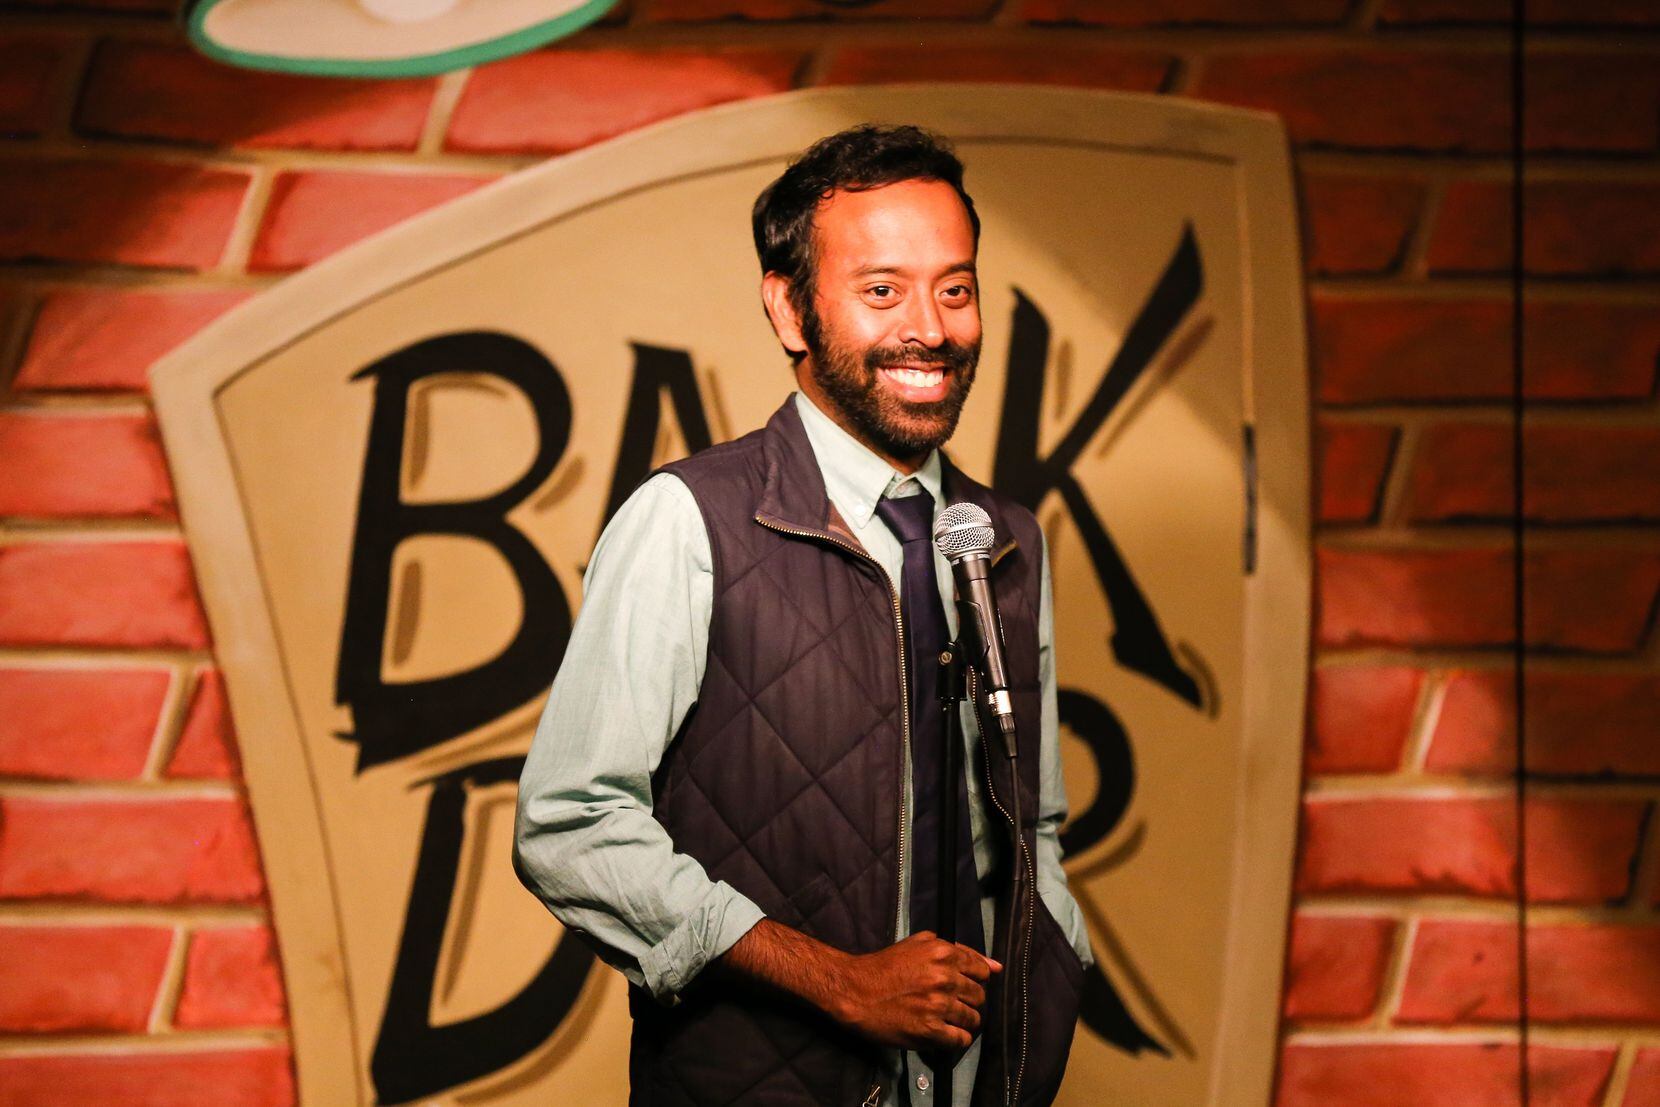 Comedian Paul Varghese performs at the Backdoor Comedy Club.